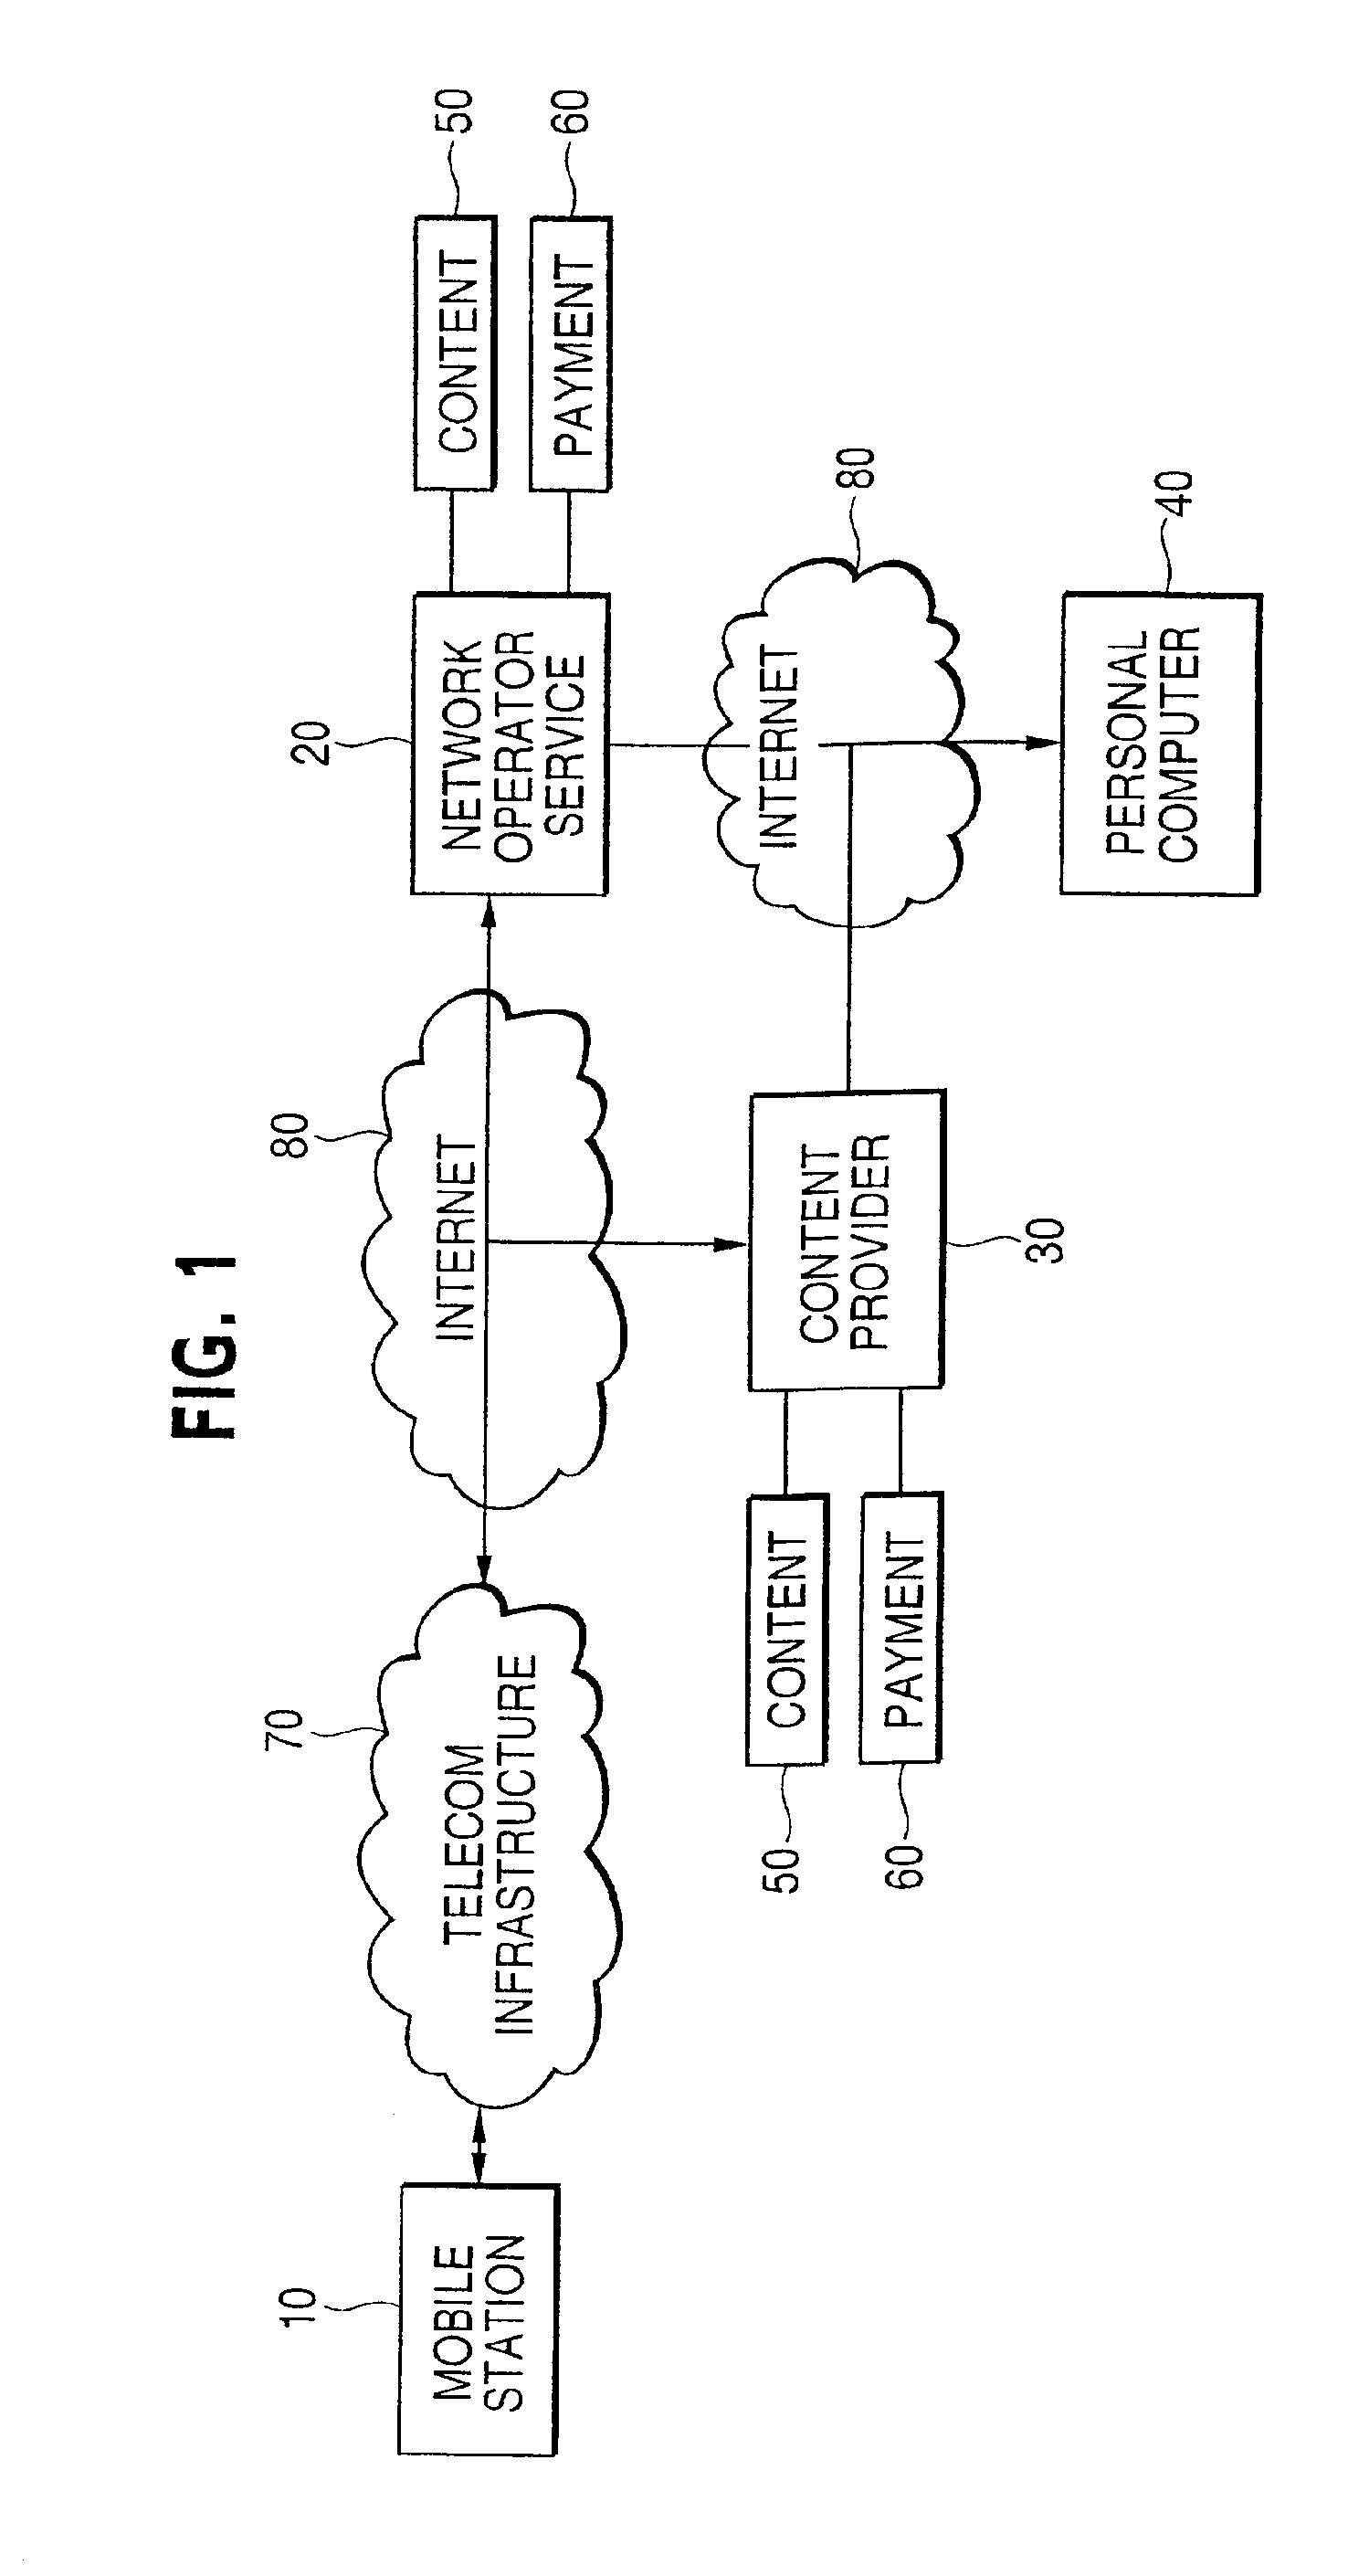 System and method of secure payment and delivery of goods and services